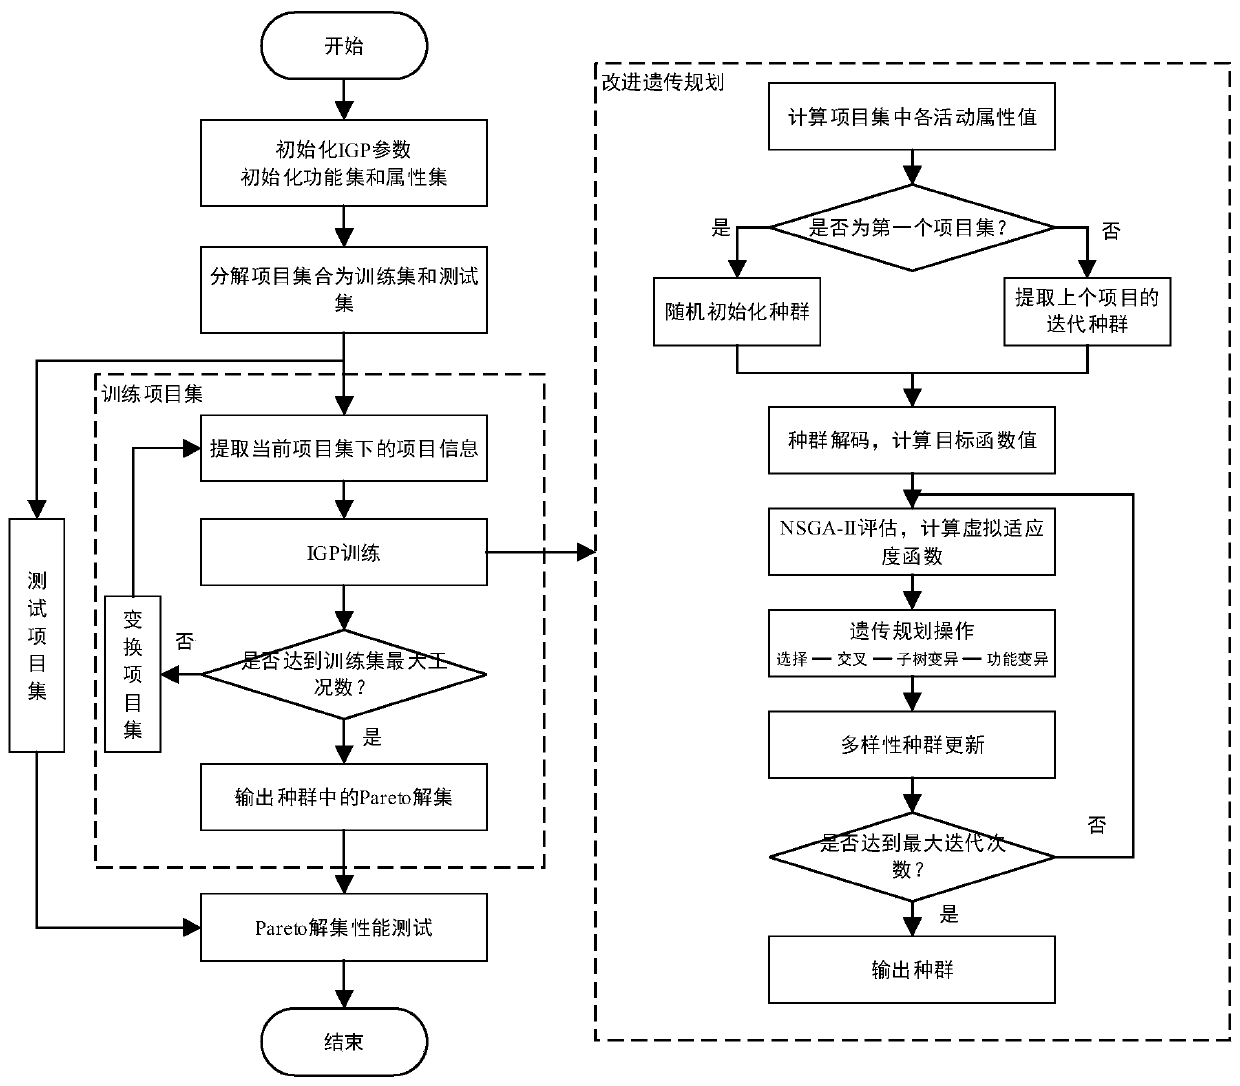 Improved genetic programming algorithm optimization method for resource-constrained multi-project scheduling